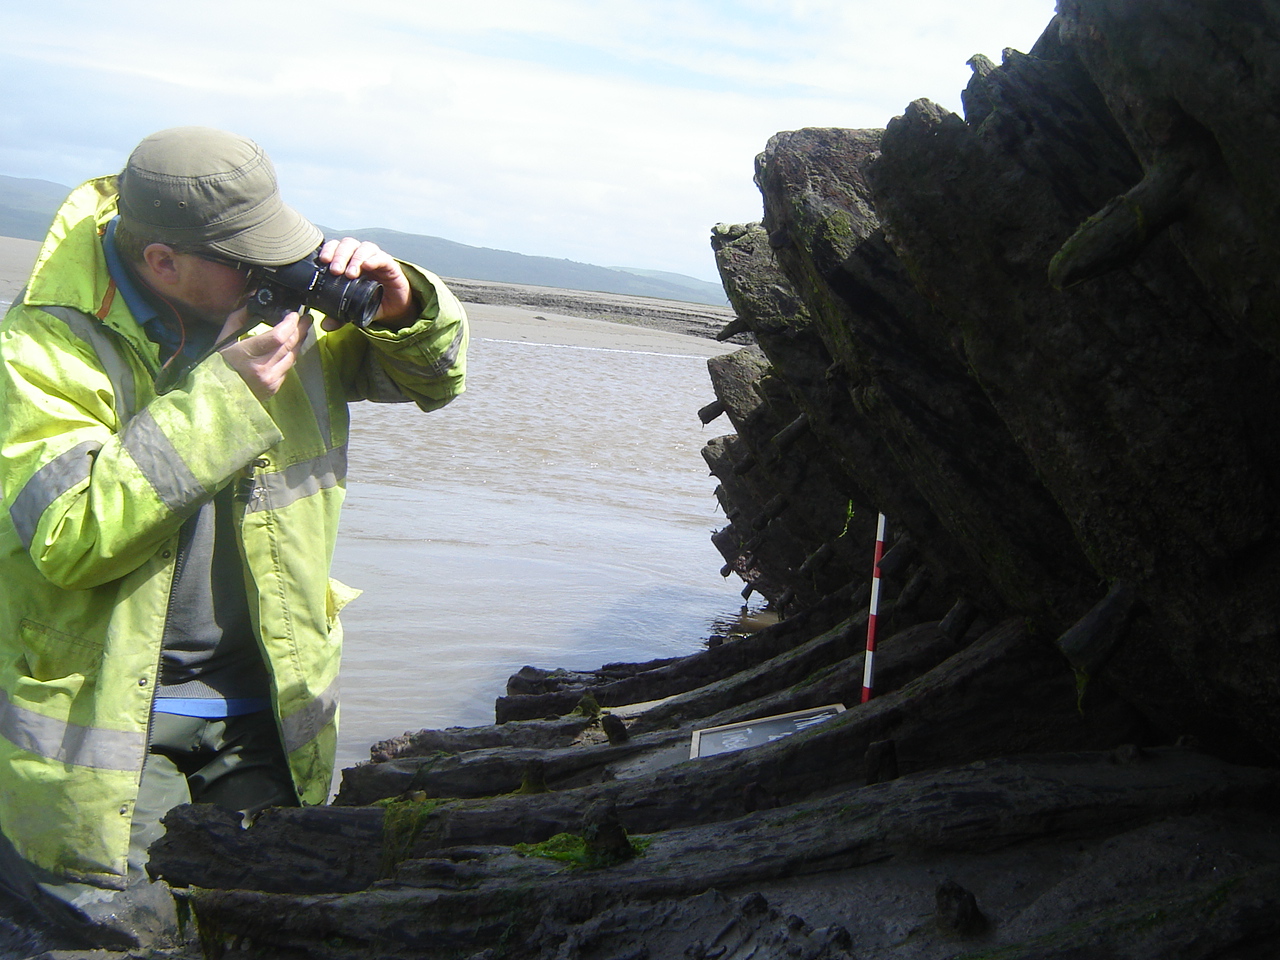 Sketching and photographing the exposed timbers